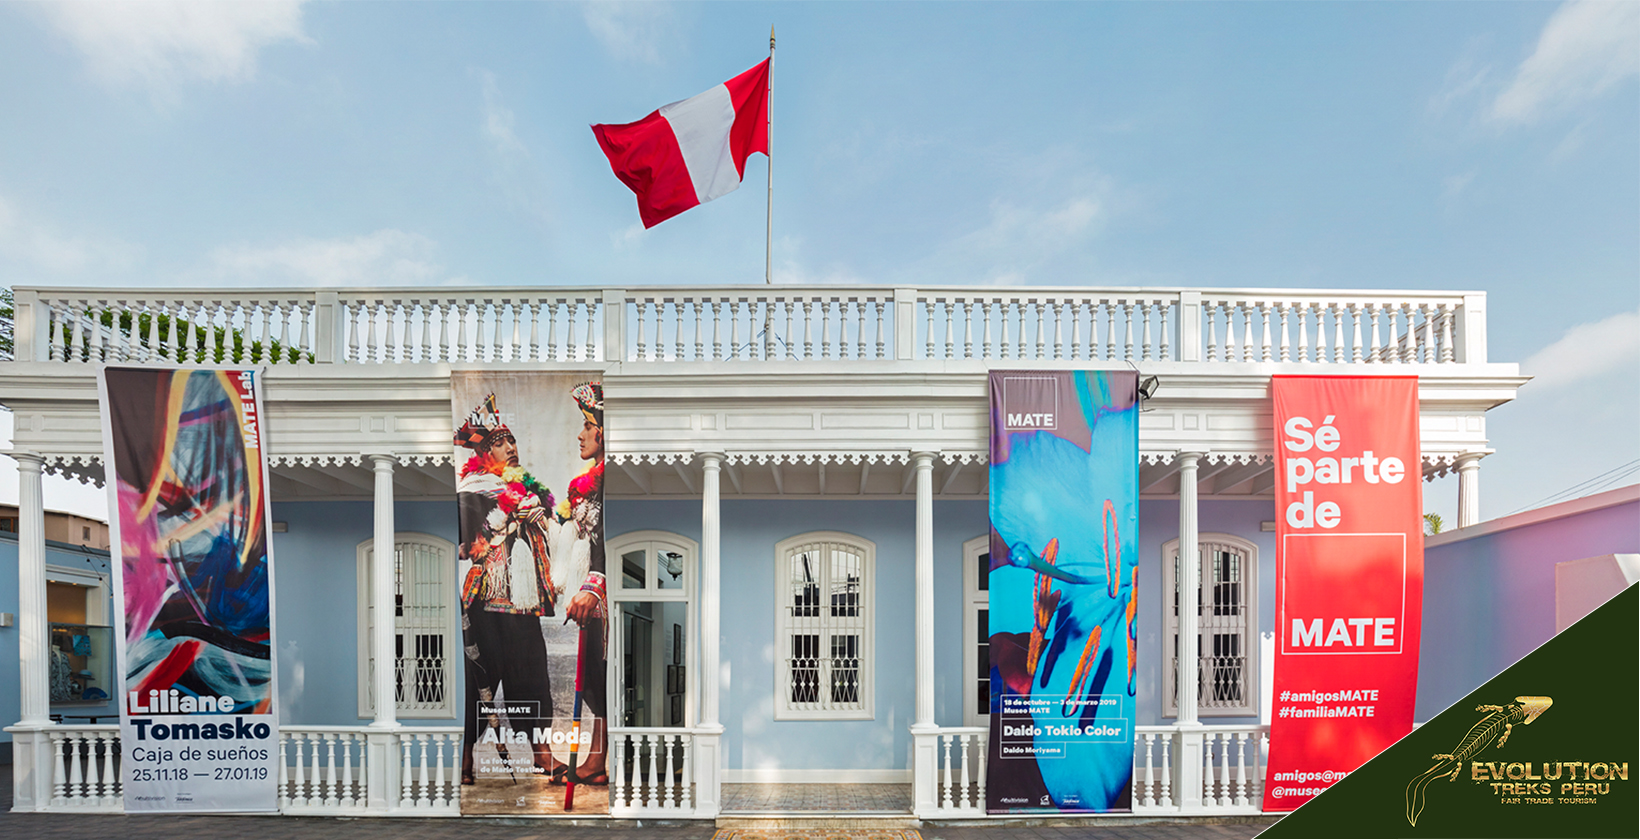 MATE Mario Testino Museum Peru Guide: Tours, Artifacts, Maps, Buildings, Facts and History